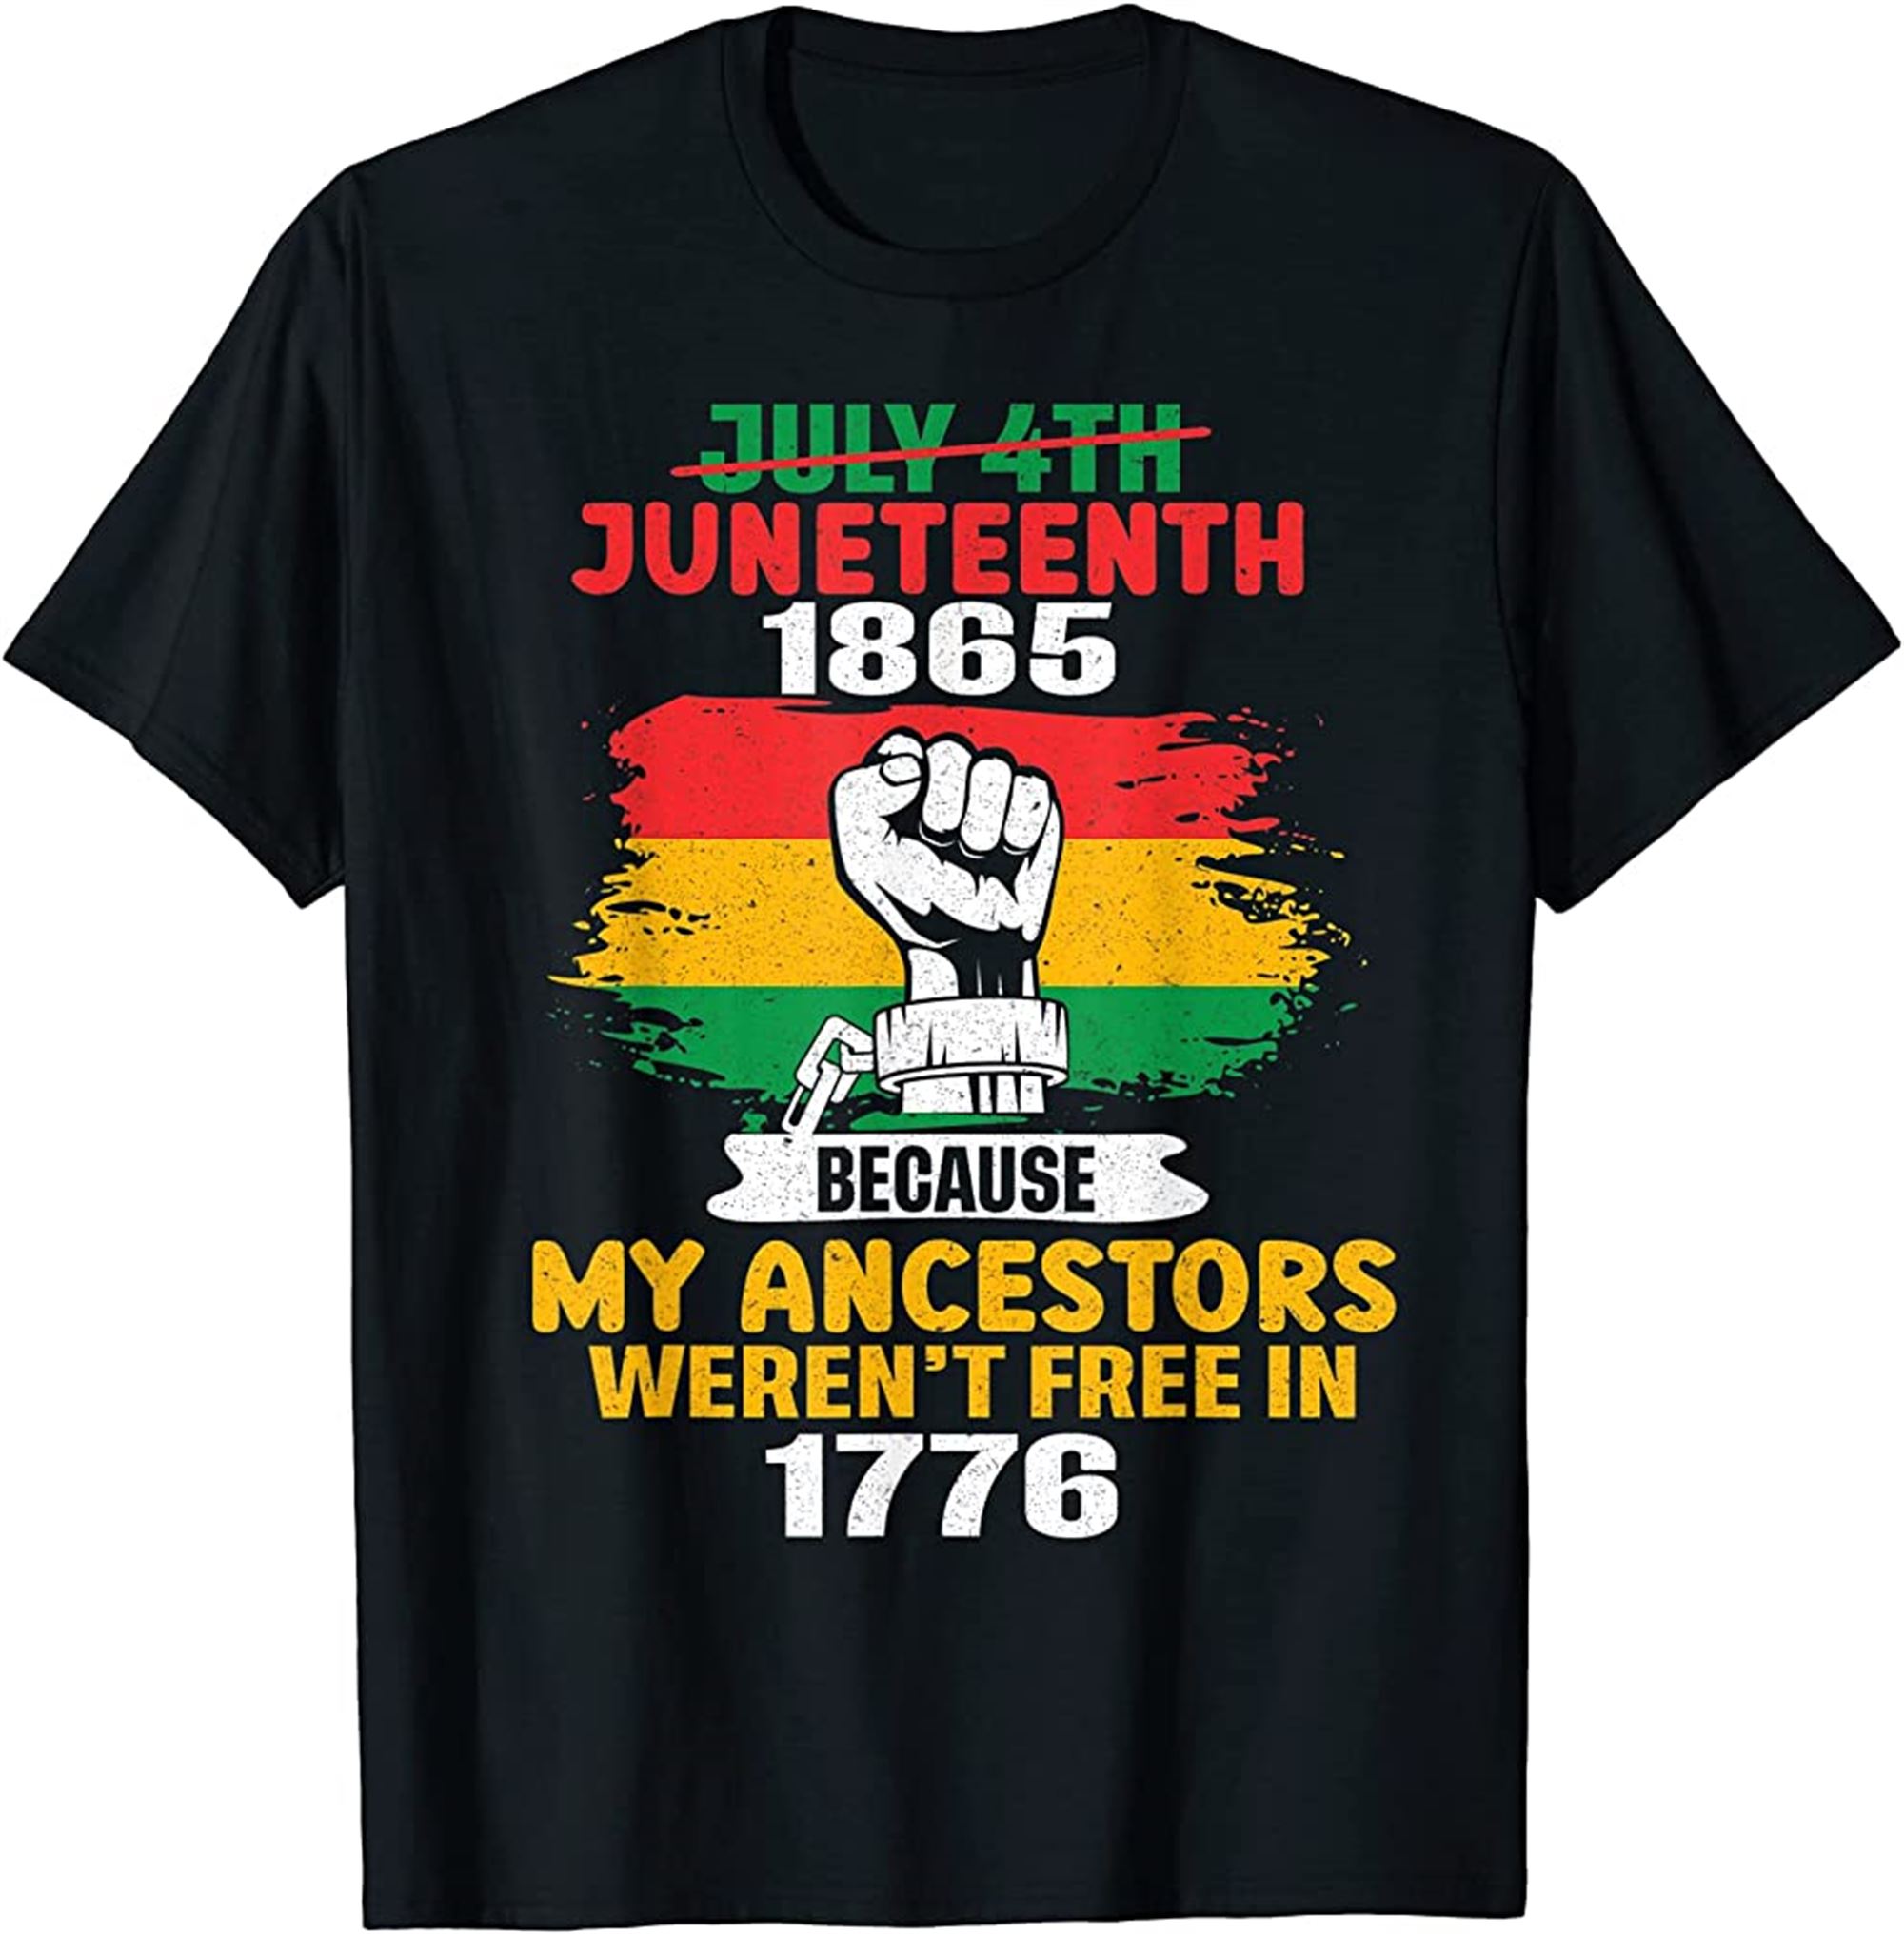 July 4th Juneteenth 1865 Because My Ancestors June Teenth T-shirt Size Up To 5xl